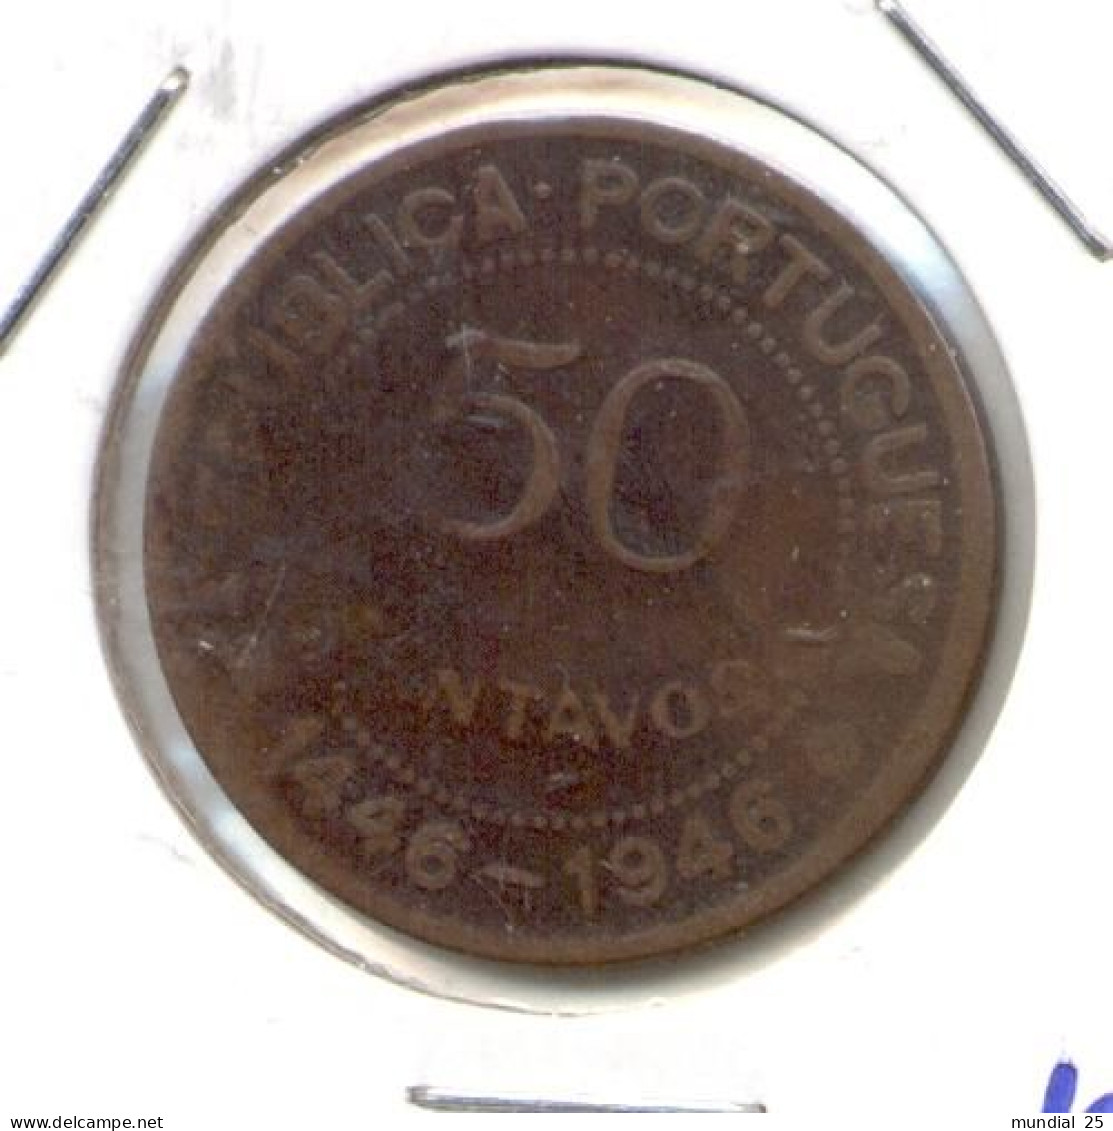 GUINEA-BISSAU PORTUGAL 50 CENTAVOS N/D (1946) - 500th ANNIVERSARY OF DISCOVERY - Guinea Bissau